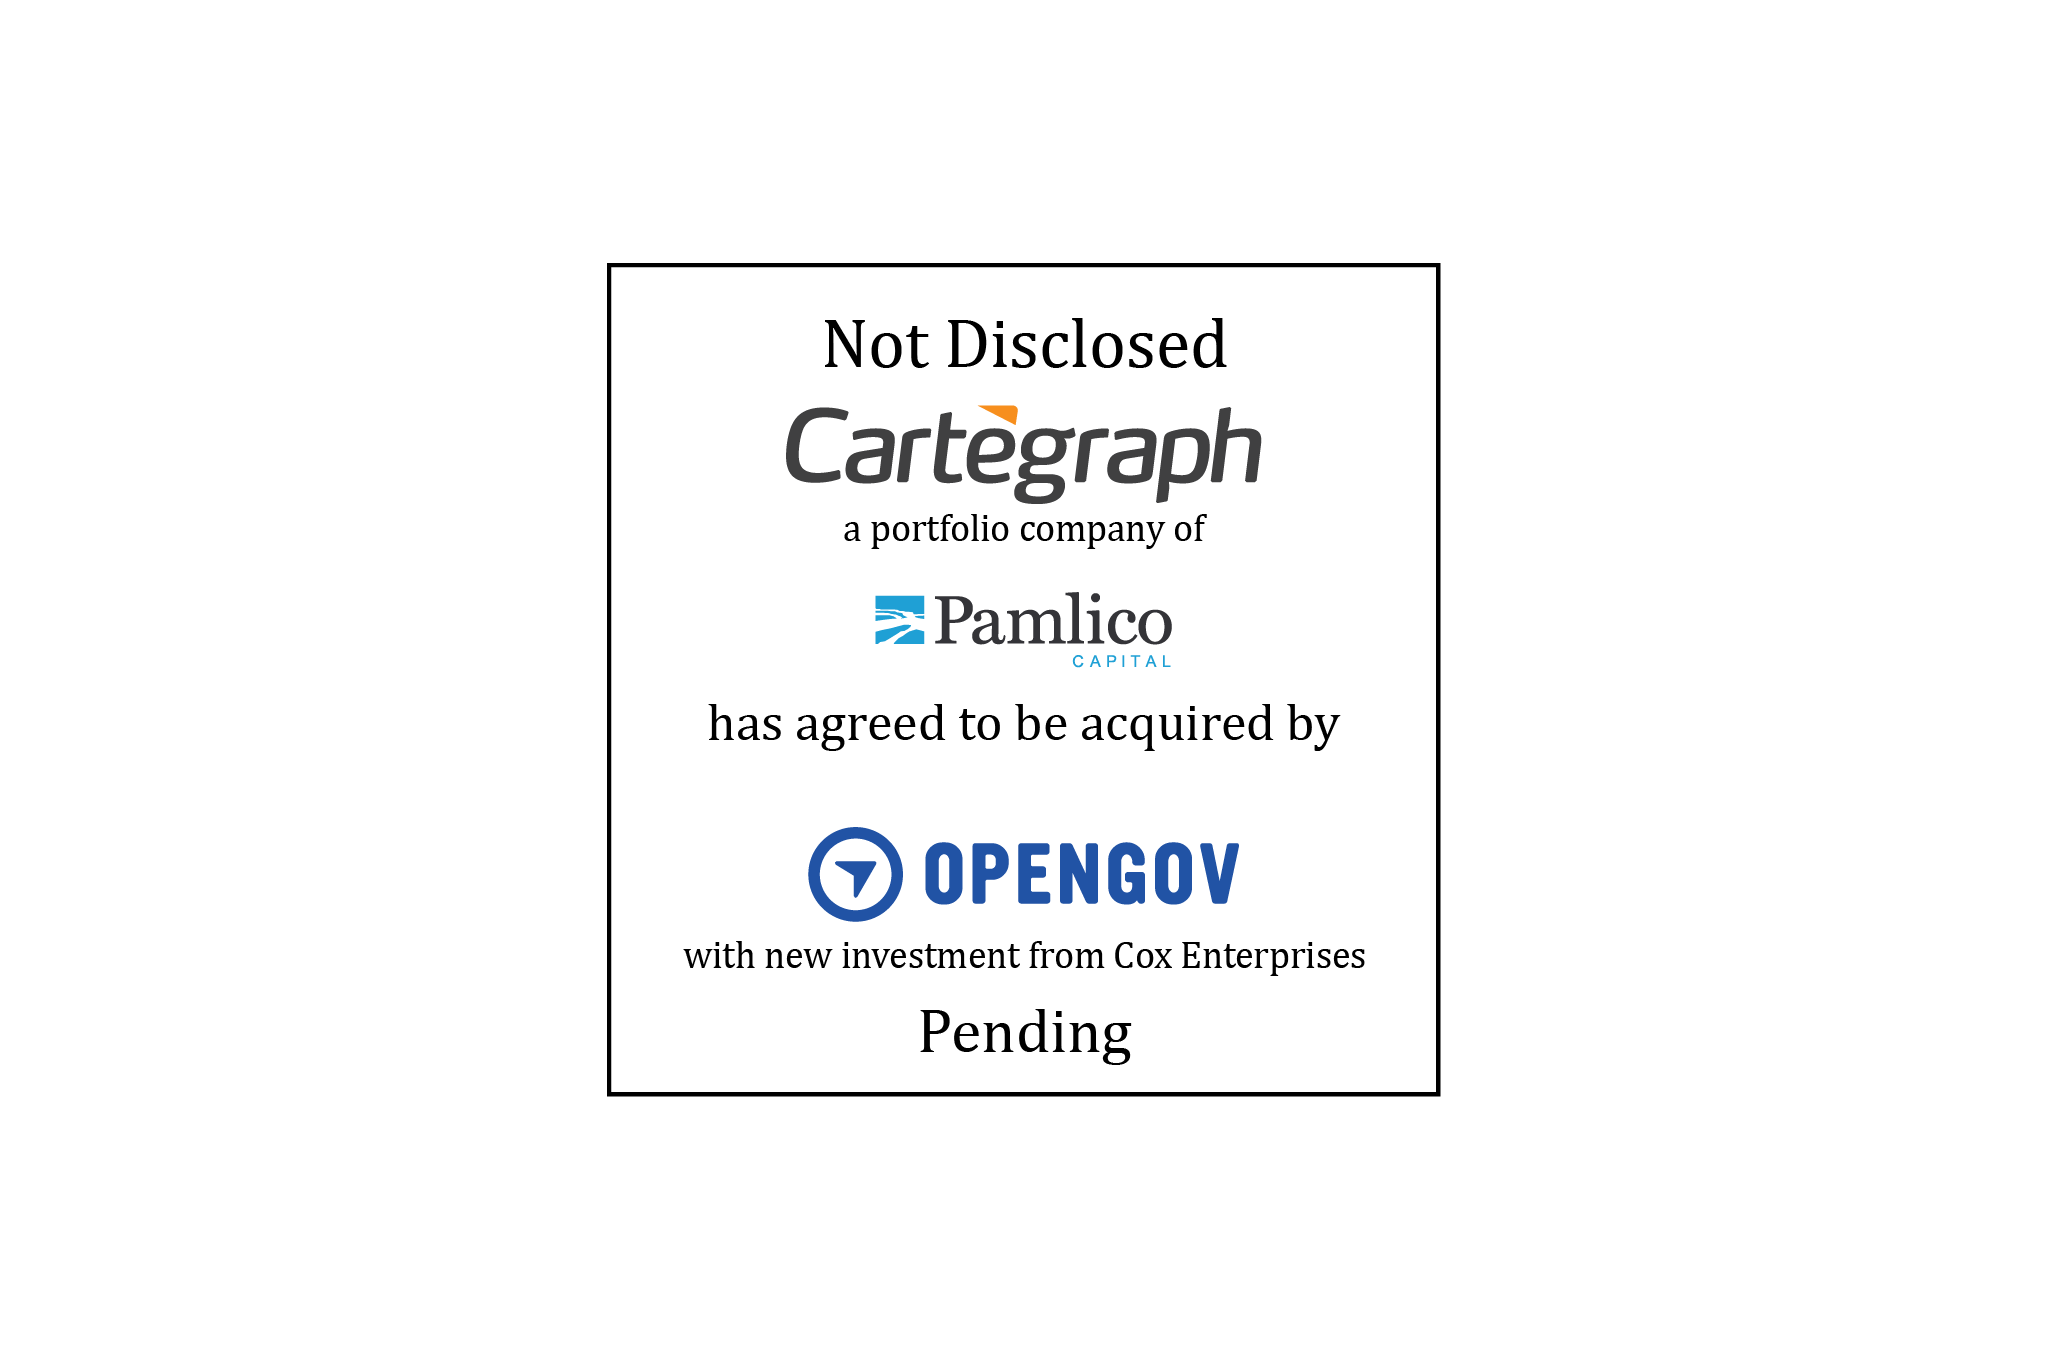 Not Disclosed | Cartegraph (logo), a portfolio company of Pamlico Capital (logo), has agreed to be Acquired by OpenGov (logo) with new investment from Cox Enterprises | Pending